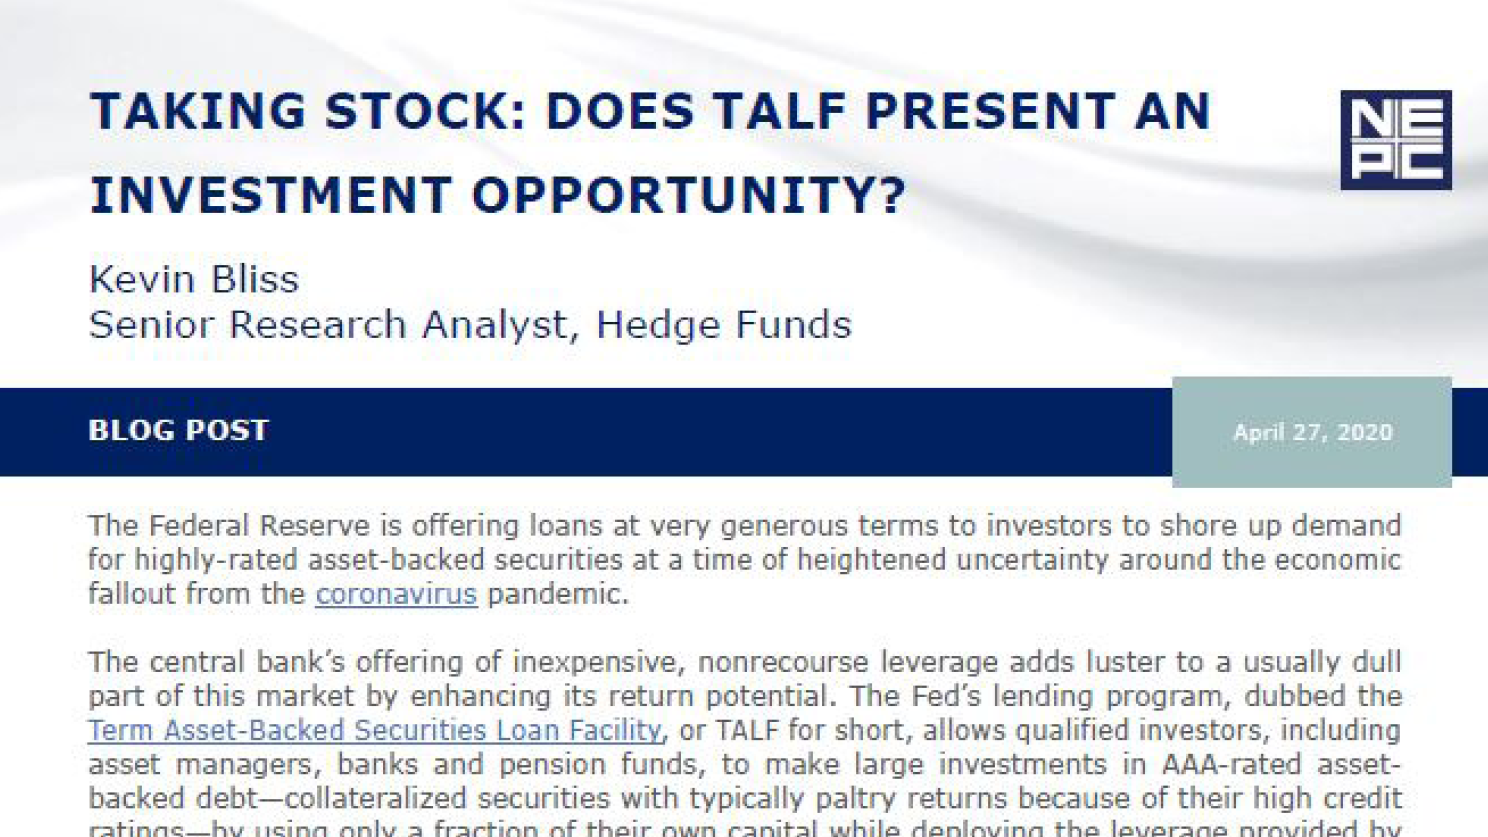 Taking Stock: Does TALF Present an Investment Opportunity?